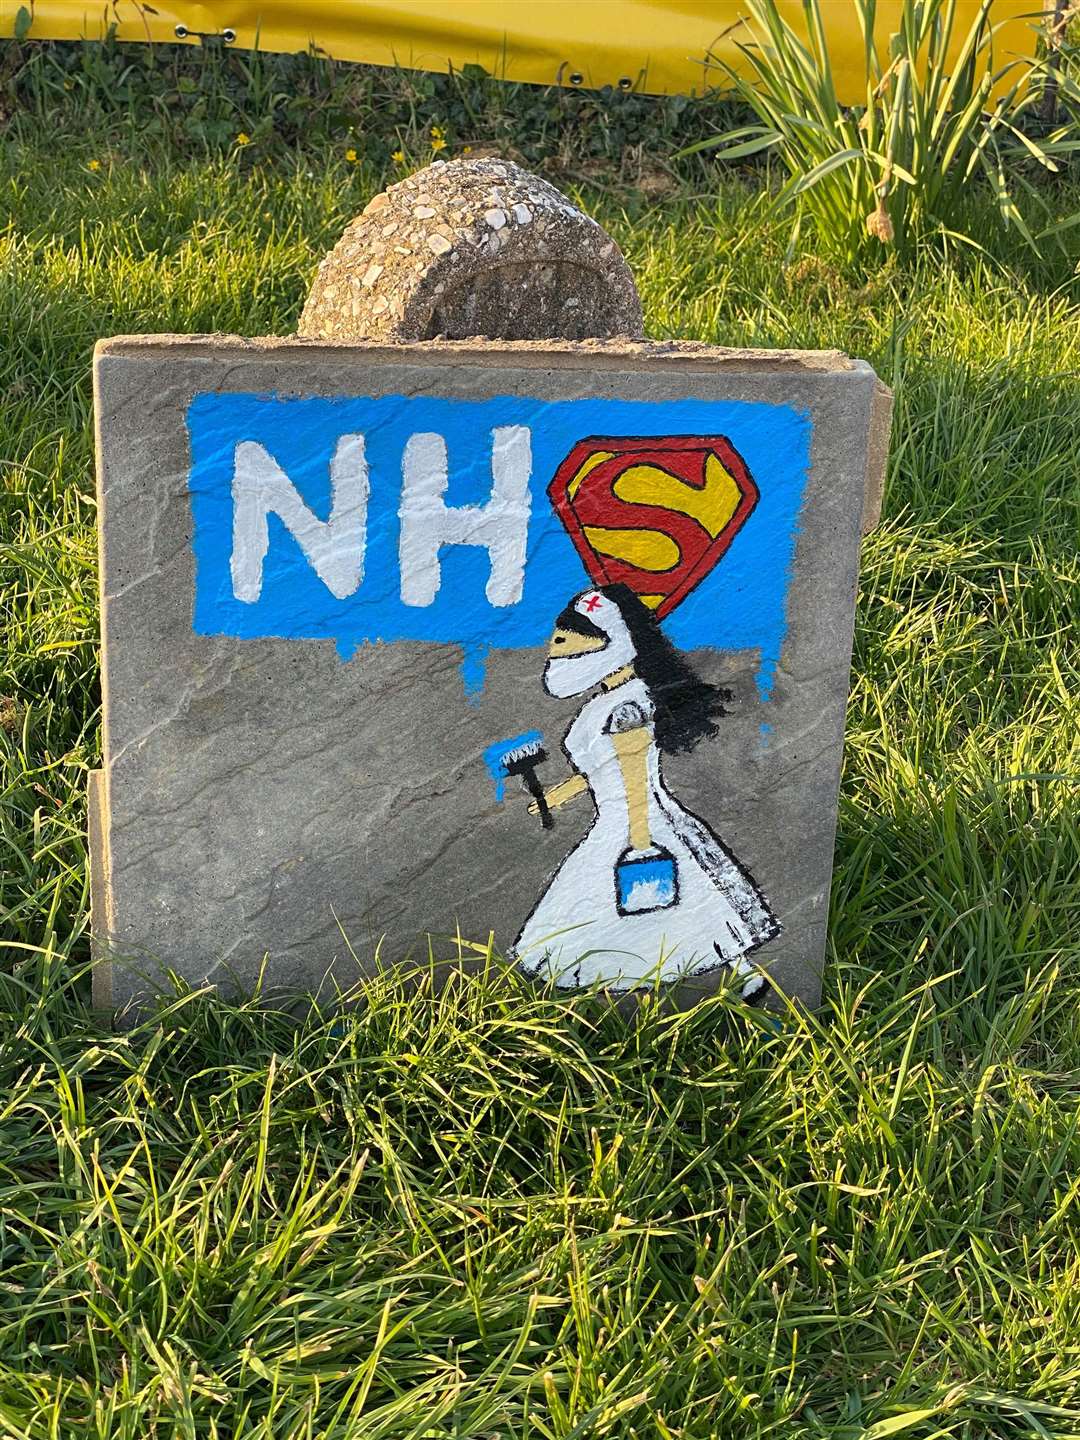 One of the painting for the NHS by Vicky Thomas, April 2020